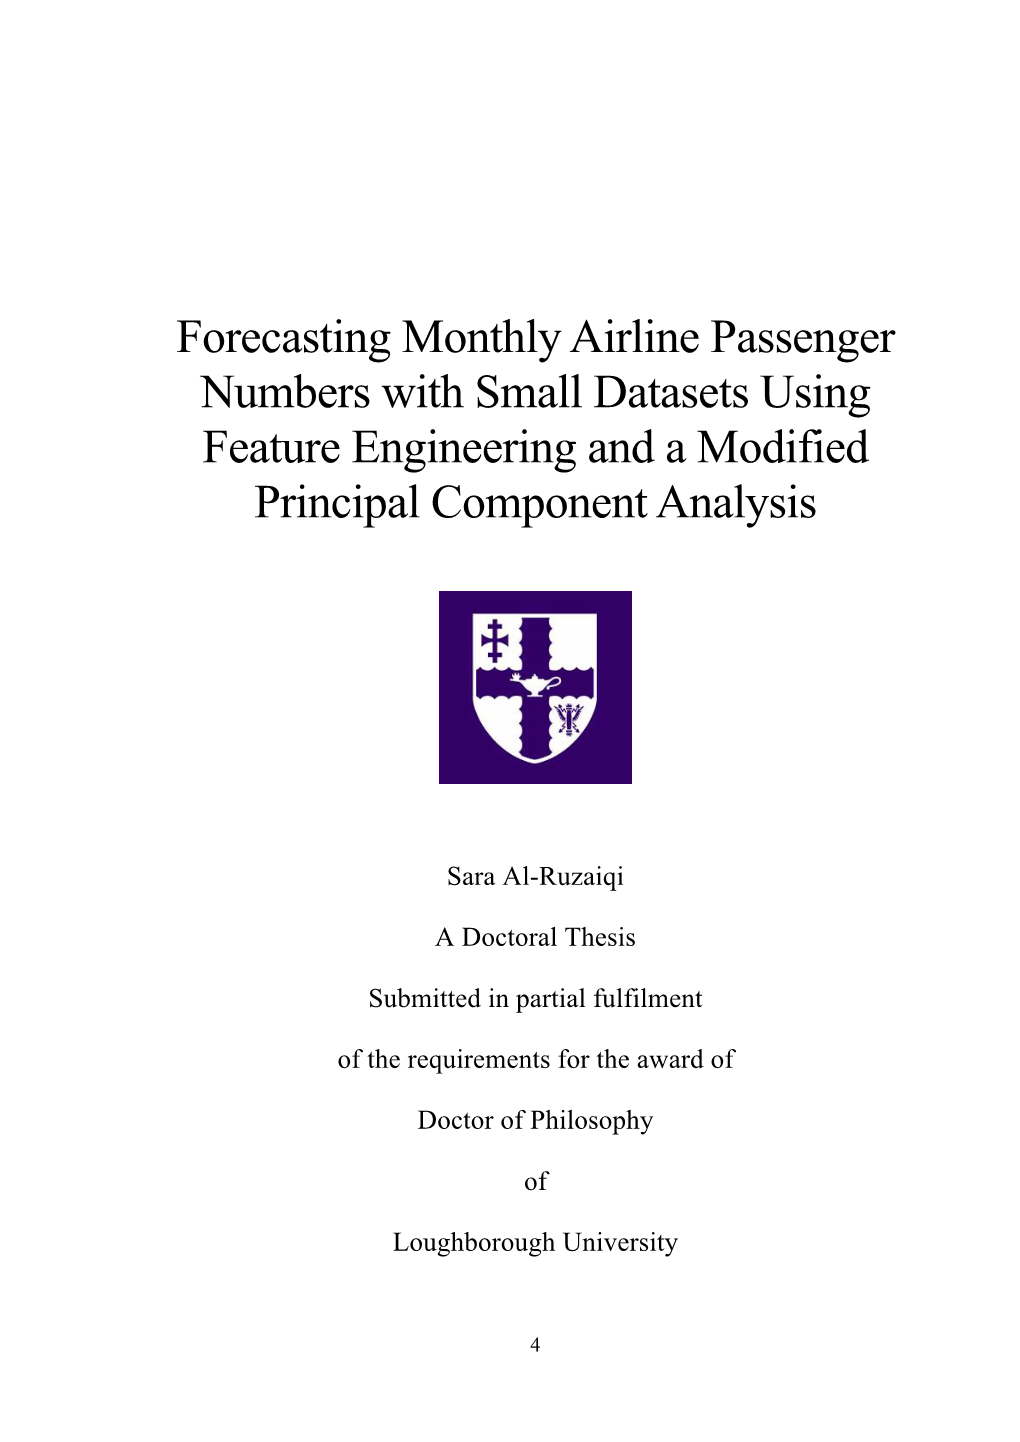 Forecasting Monthly Airline Passenger Numbers with Small Datasets Using Feature Engineering and a Modified Principal Component Analysis